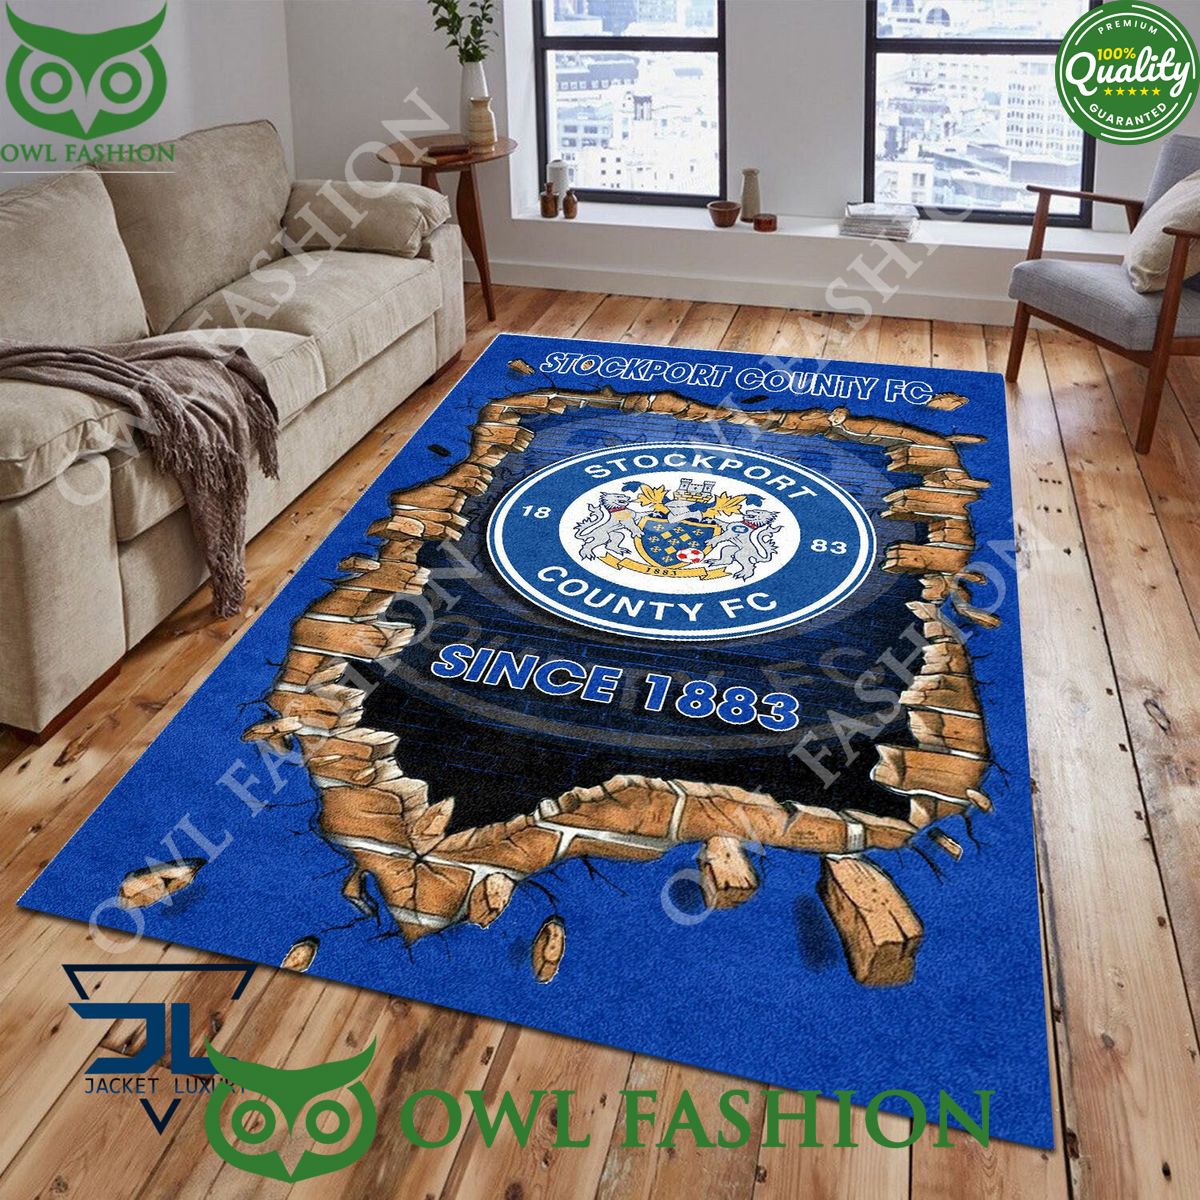 Stockport County F.C 1860 League Two Living Room Rug Carpet